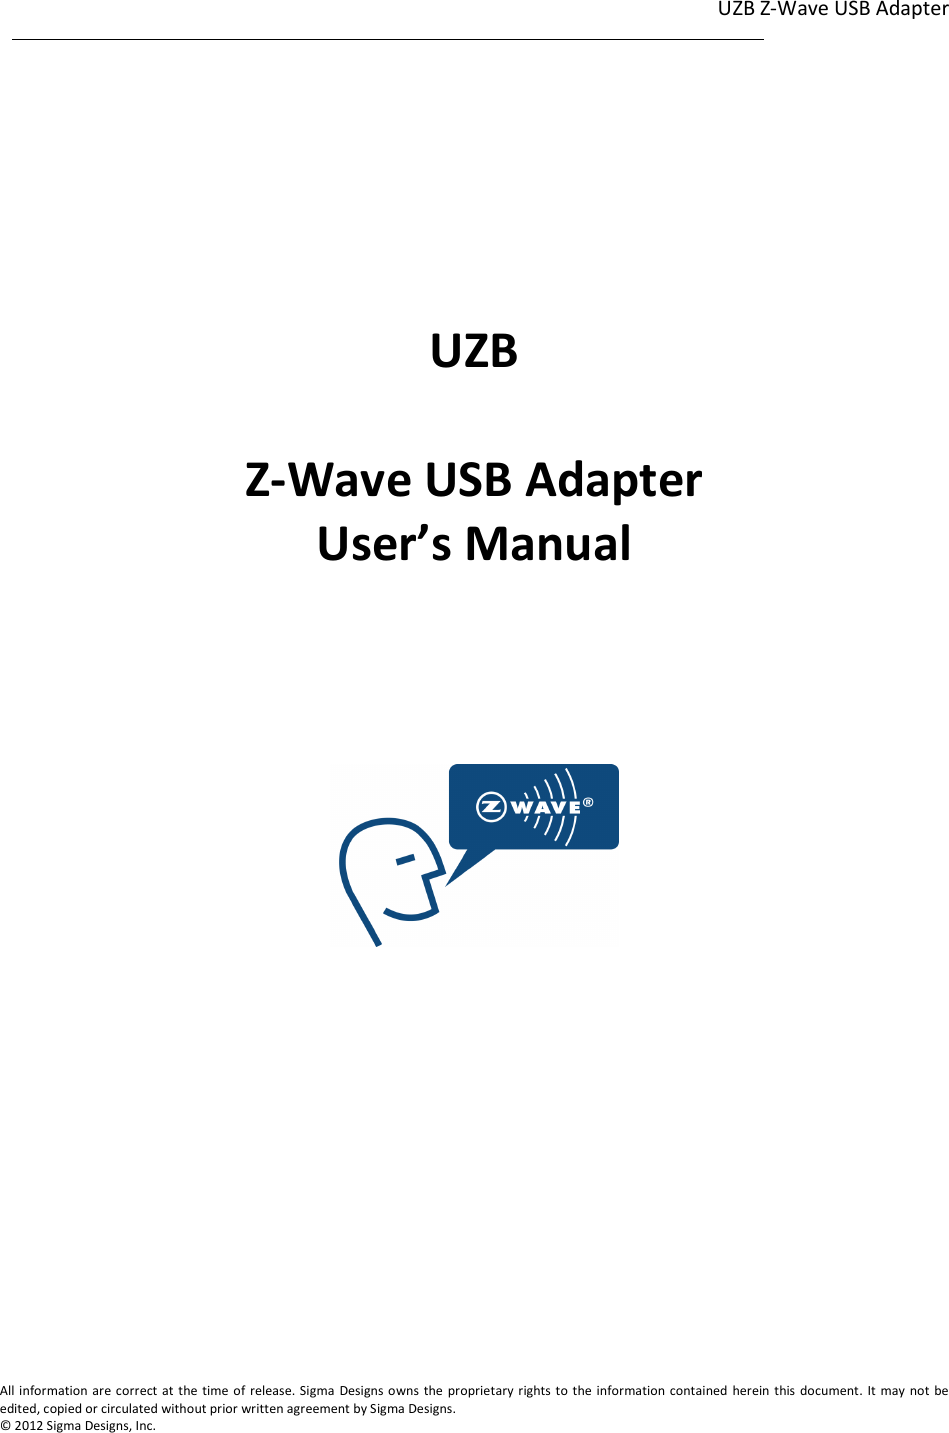 UZB Z-Wave USB Adapter  1                                                                                                                                                                                                             1             All information are correct at the time of release. Sigma  Designs owns  the proprietary rights to the information contained herein this document. It  may not  be edited, copied or circulated without prior written agreement by Sigma Designs.   © 2012 Sigma Designs, Inc.       UZB  Z-Wave USB Adapter User’s Manual        